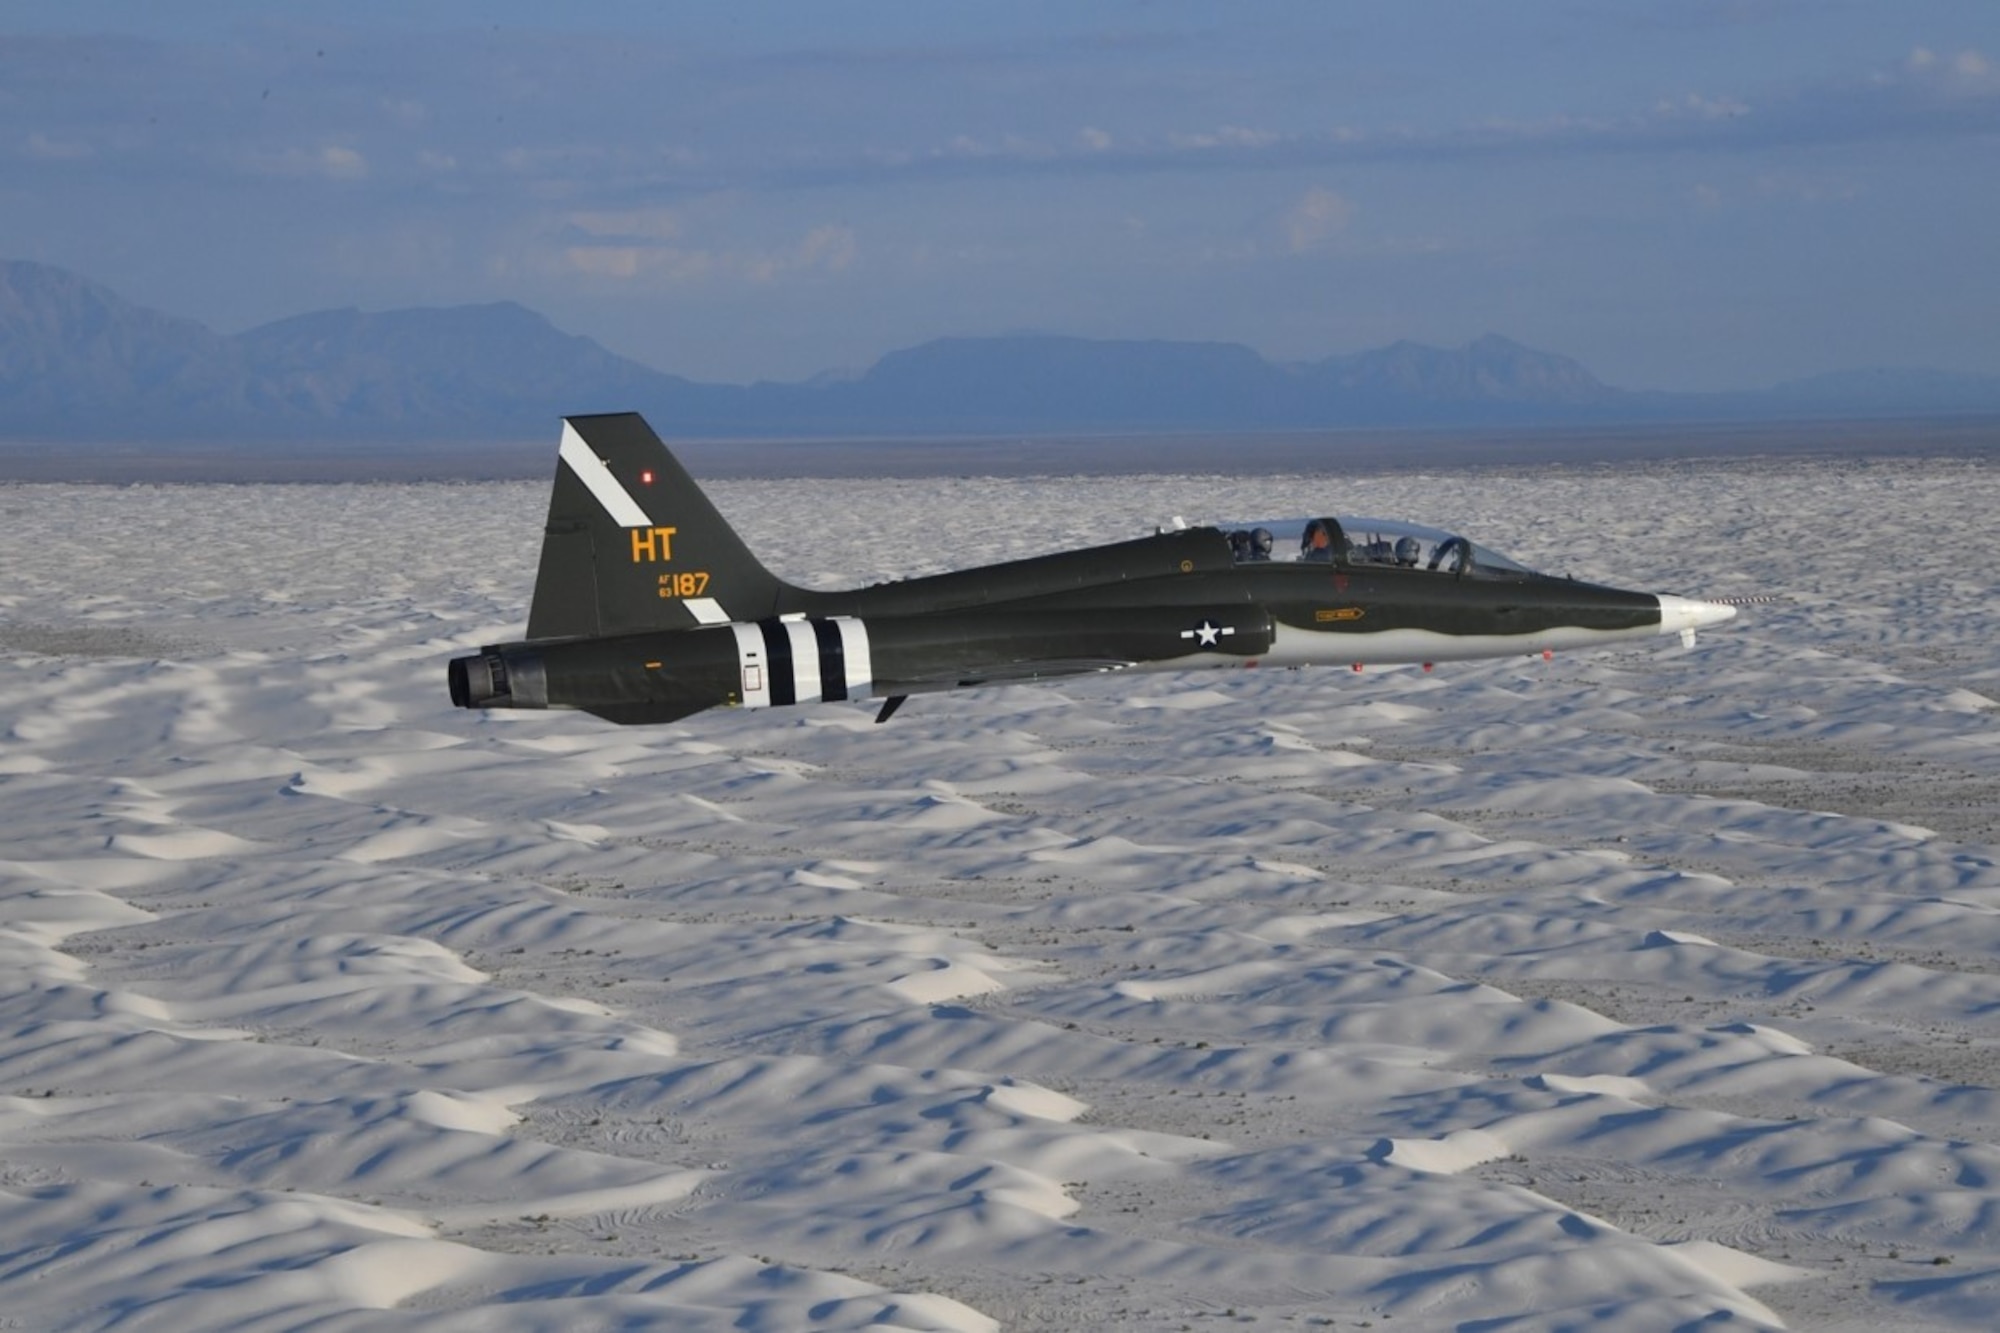 Kubernetes is being implemented on the instrumentation system of T-38 aircraft for a flight test by the Arnold Engineering Development Complex 586th Flight Test Squadron, Holloman Air Force Base, N.M. (U.S. Air Force photo)